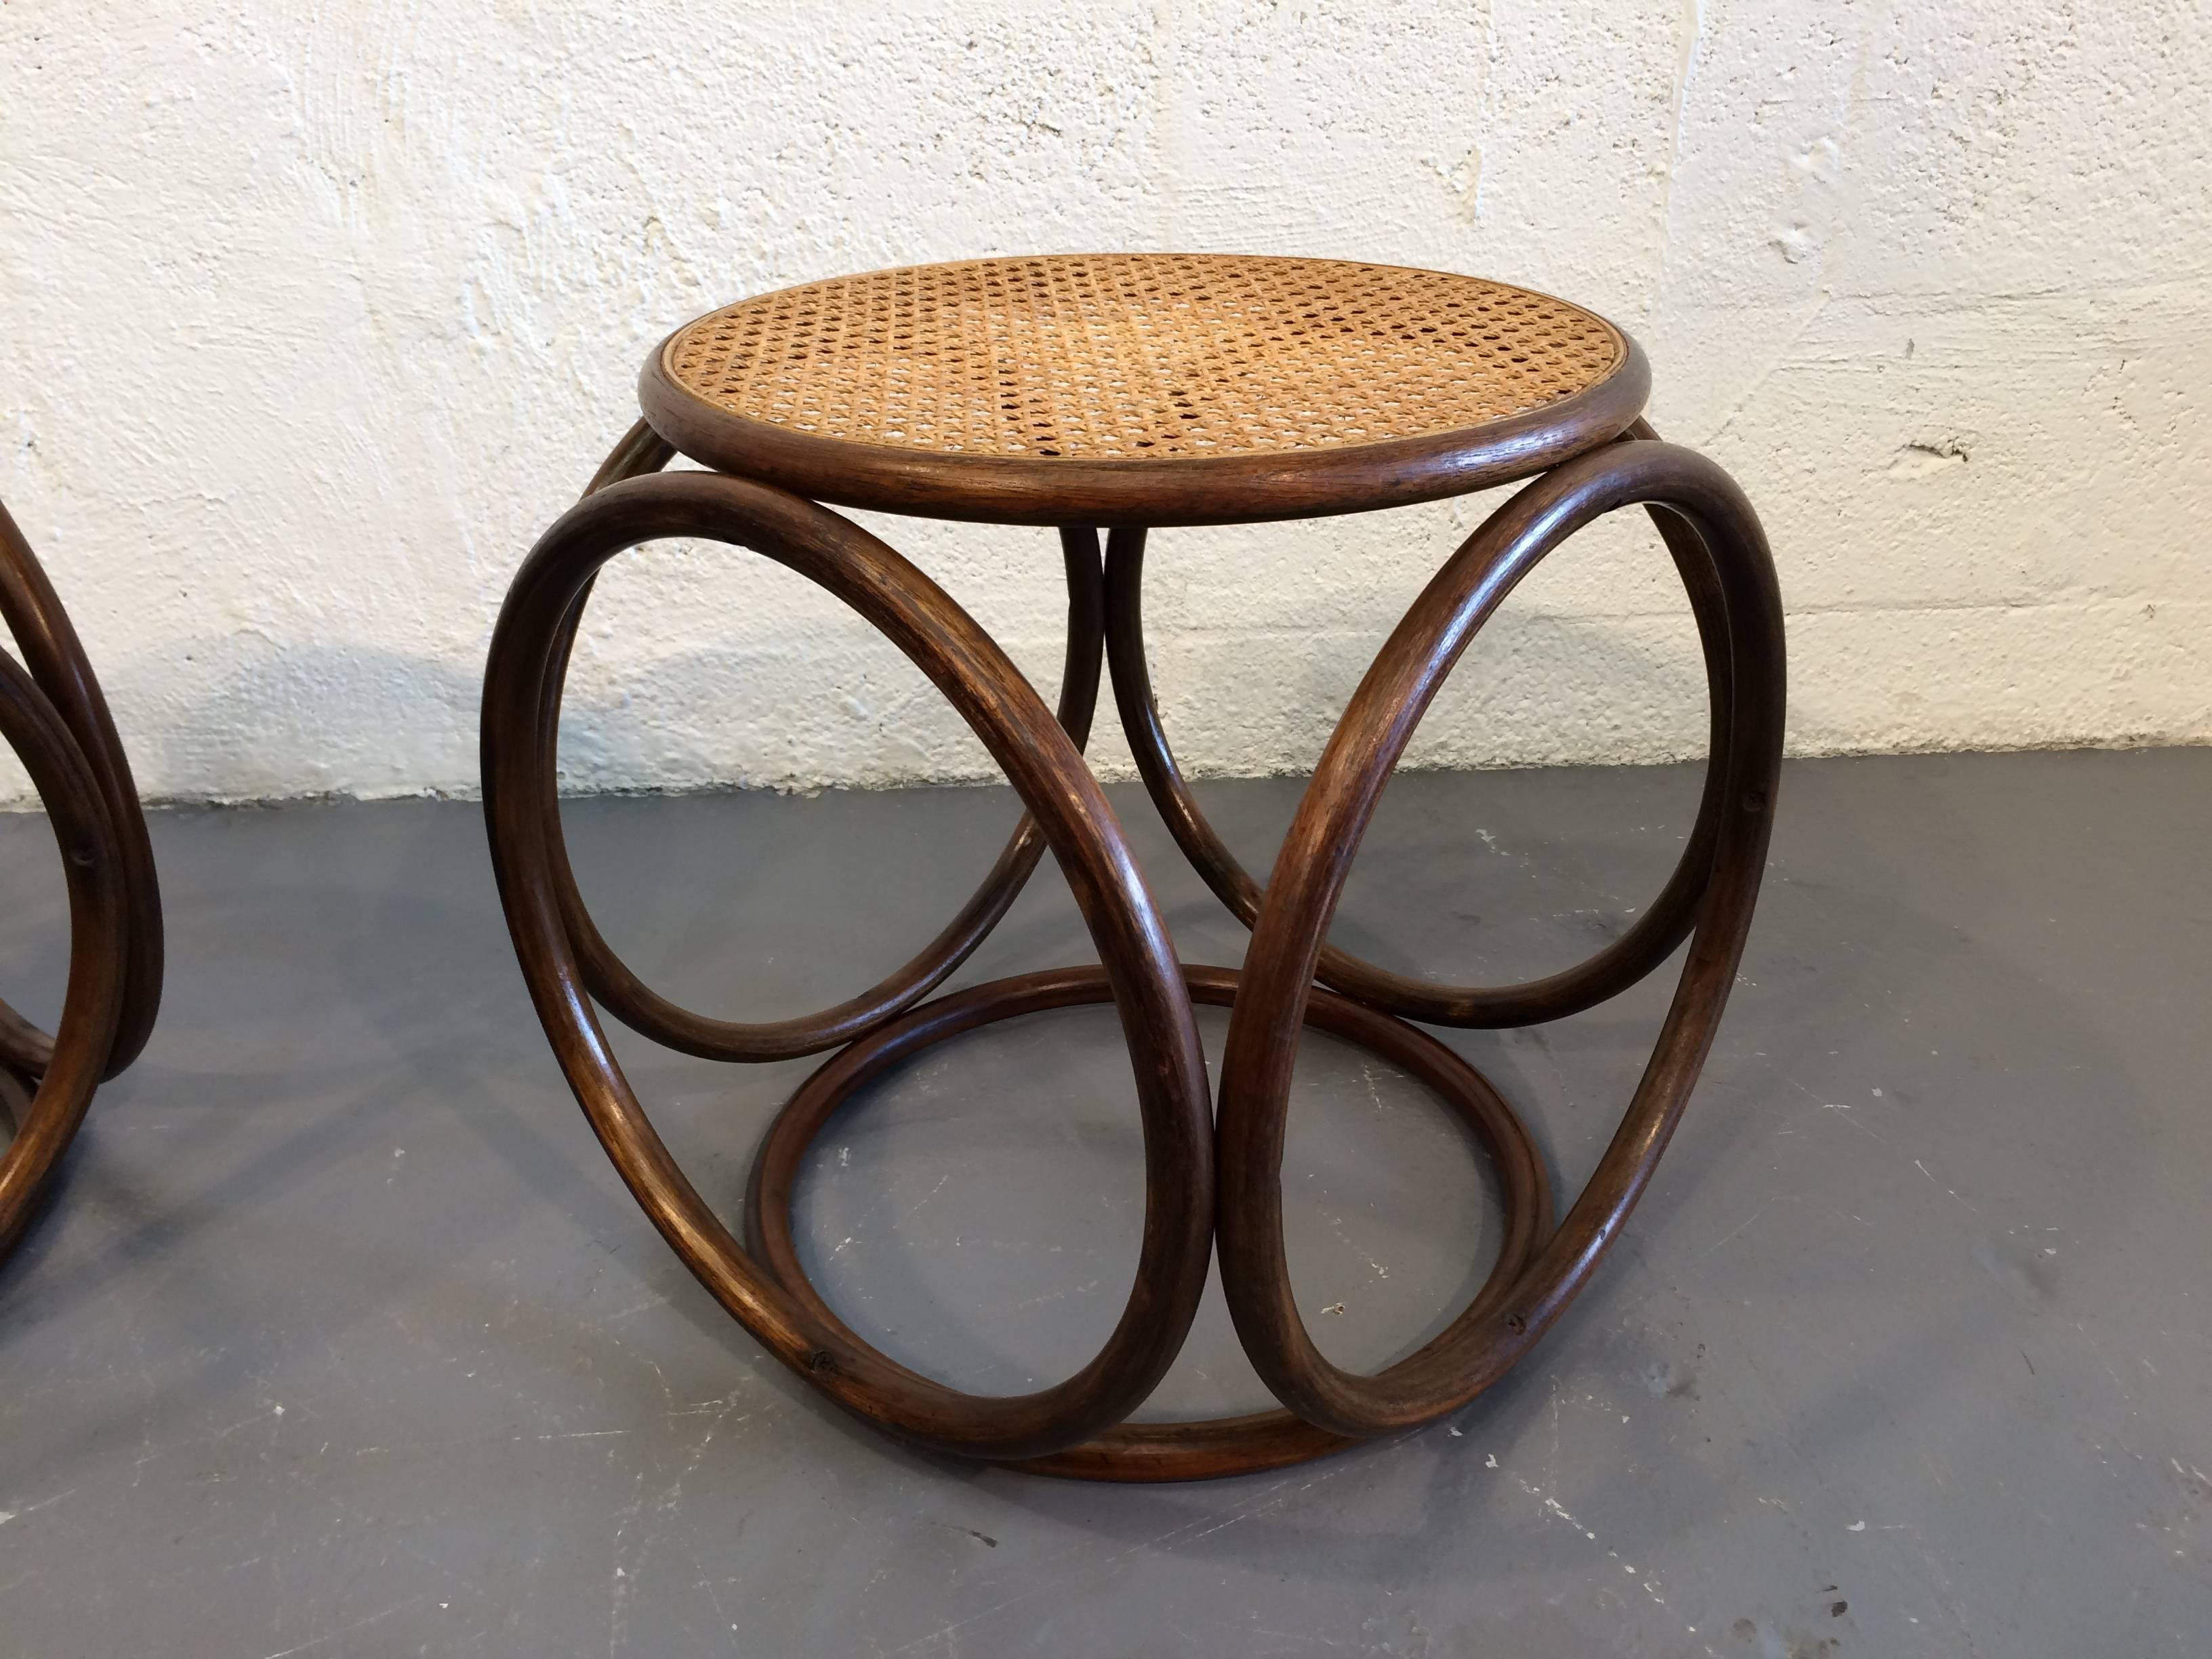 Timeless stools!